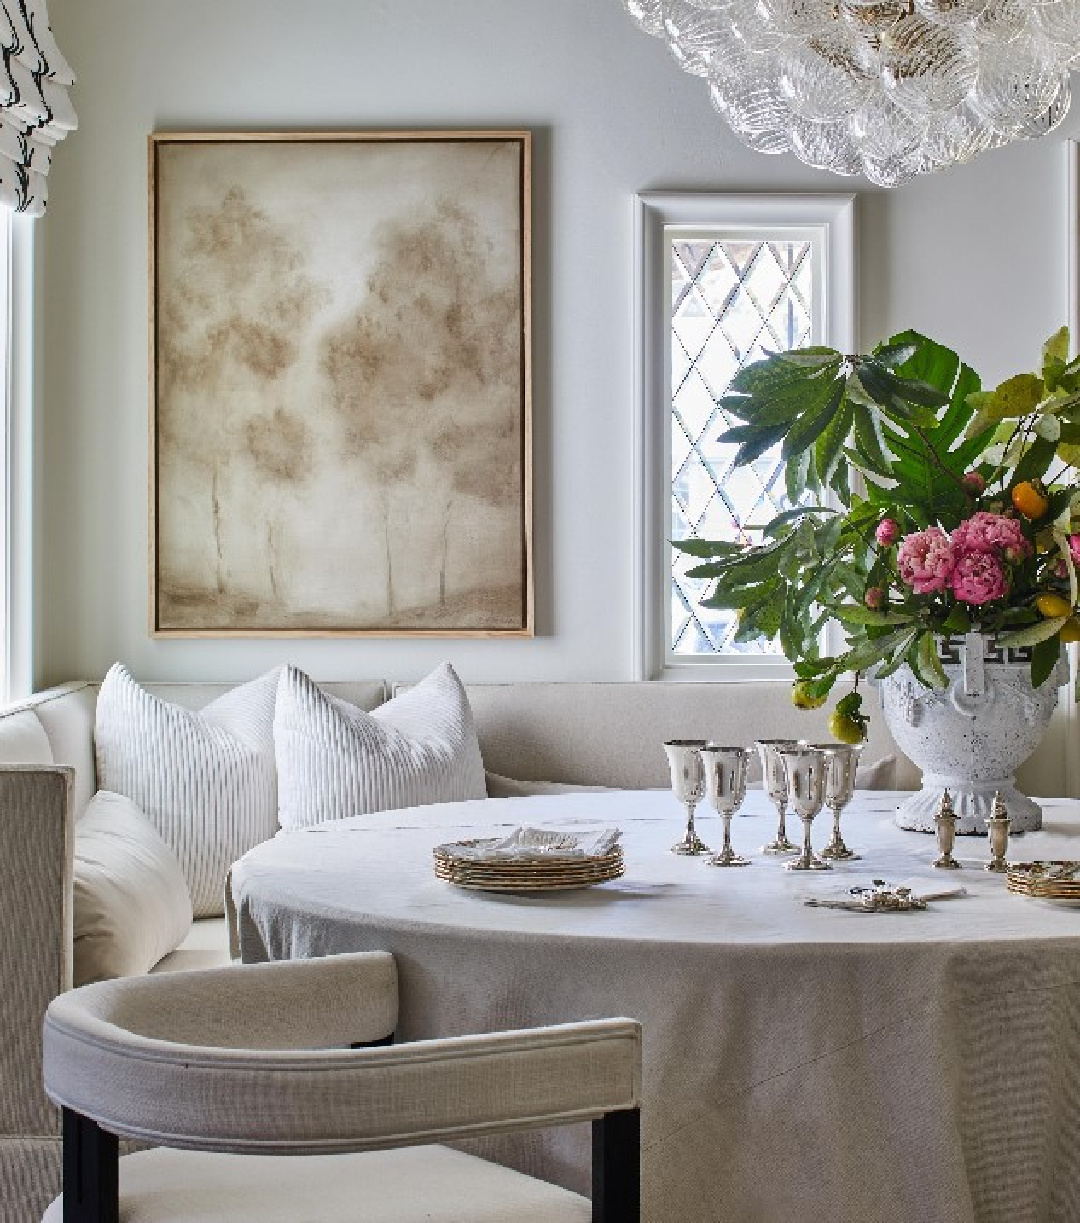 Neutral cozy opulent dining nook with banquette - @riverbrook_ #banquette #diningnook #sophisticatedinterior